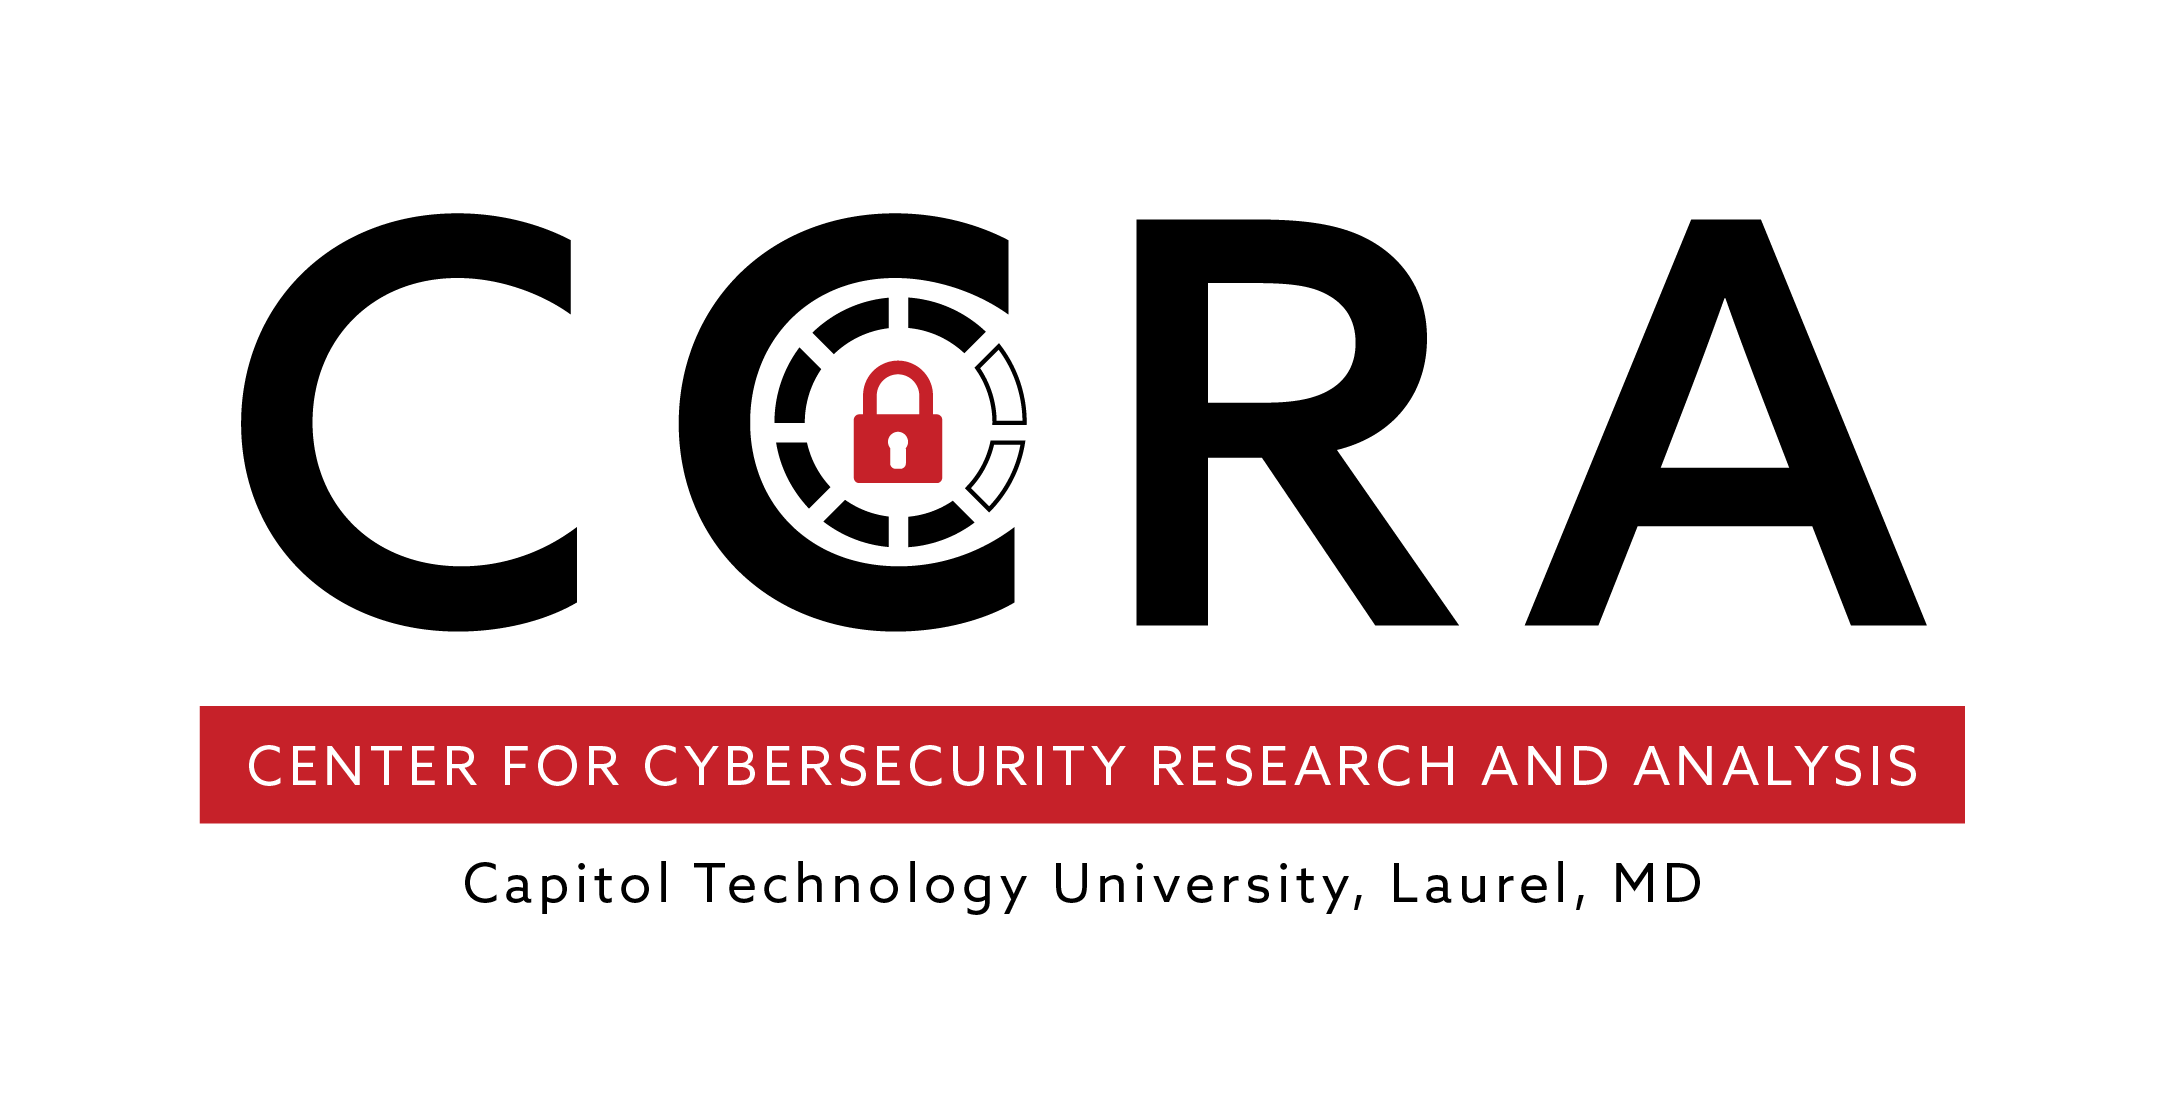 Center for Cybersecurity Research and Analysis